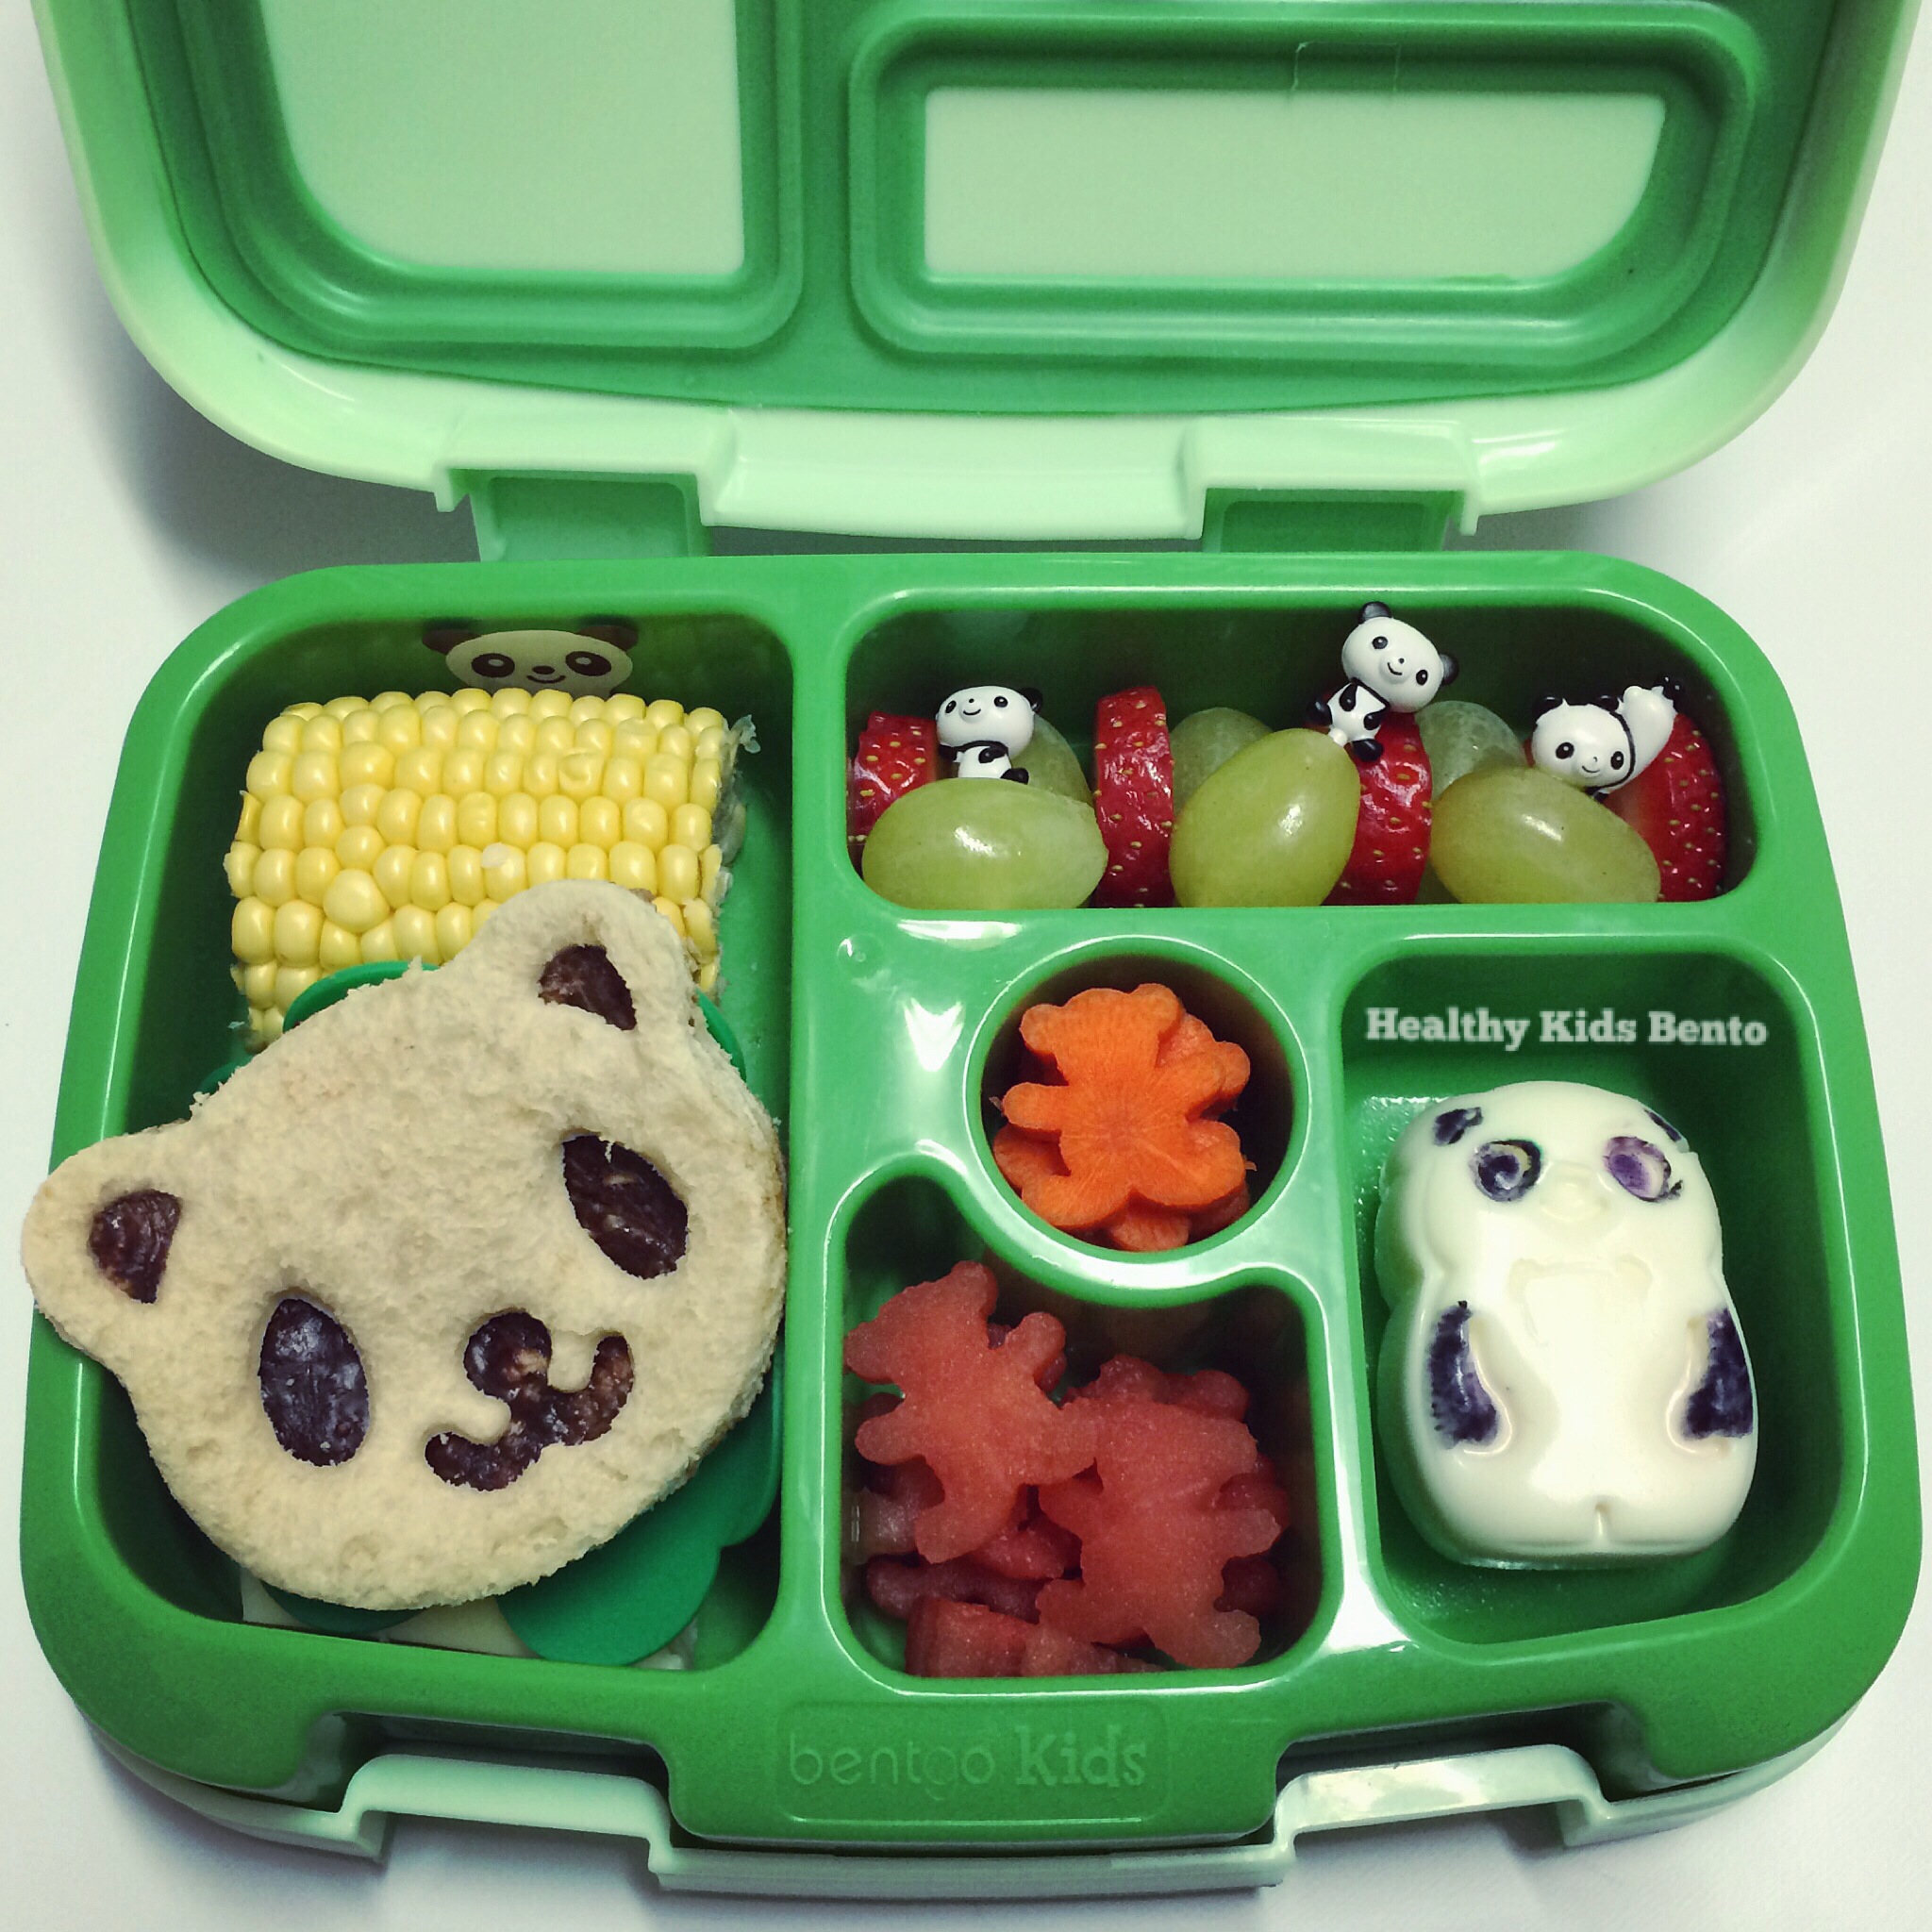 Bentgo Lunch Boxes Review: Are They Worth the Hype?